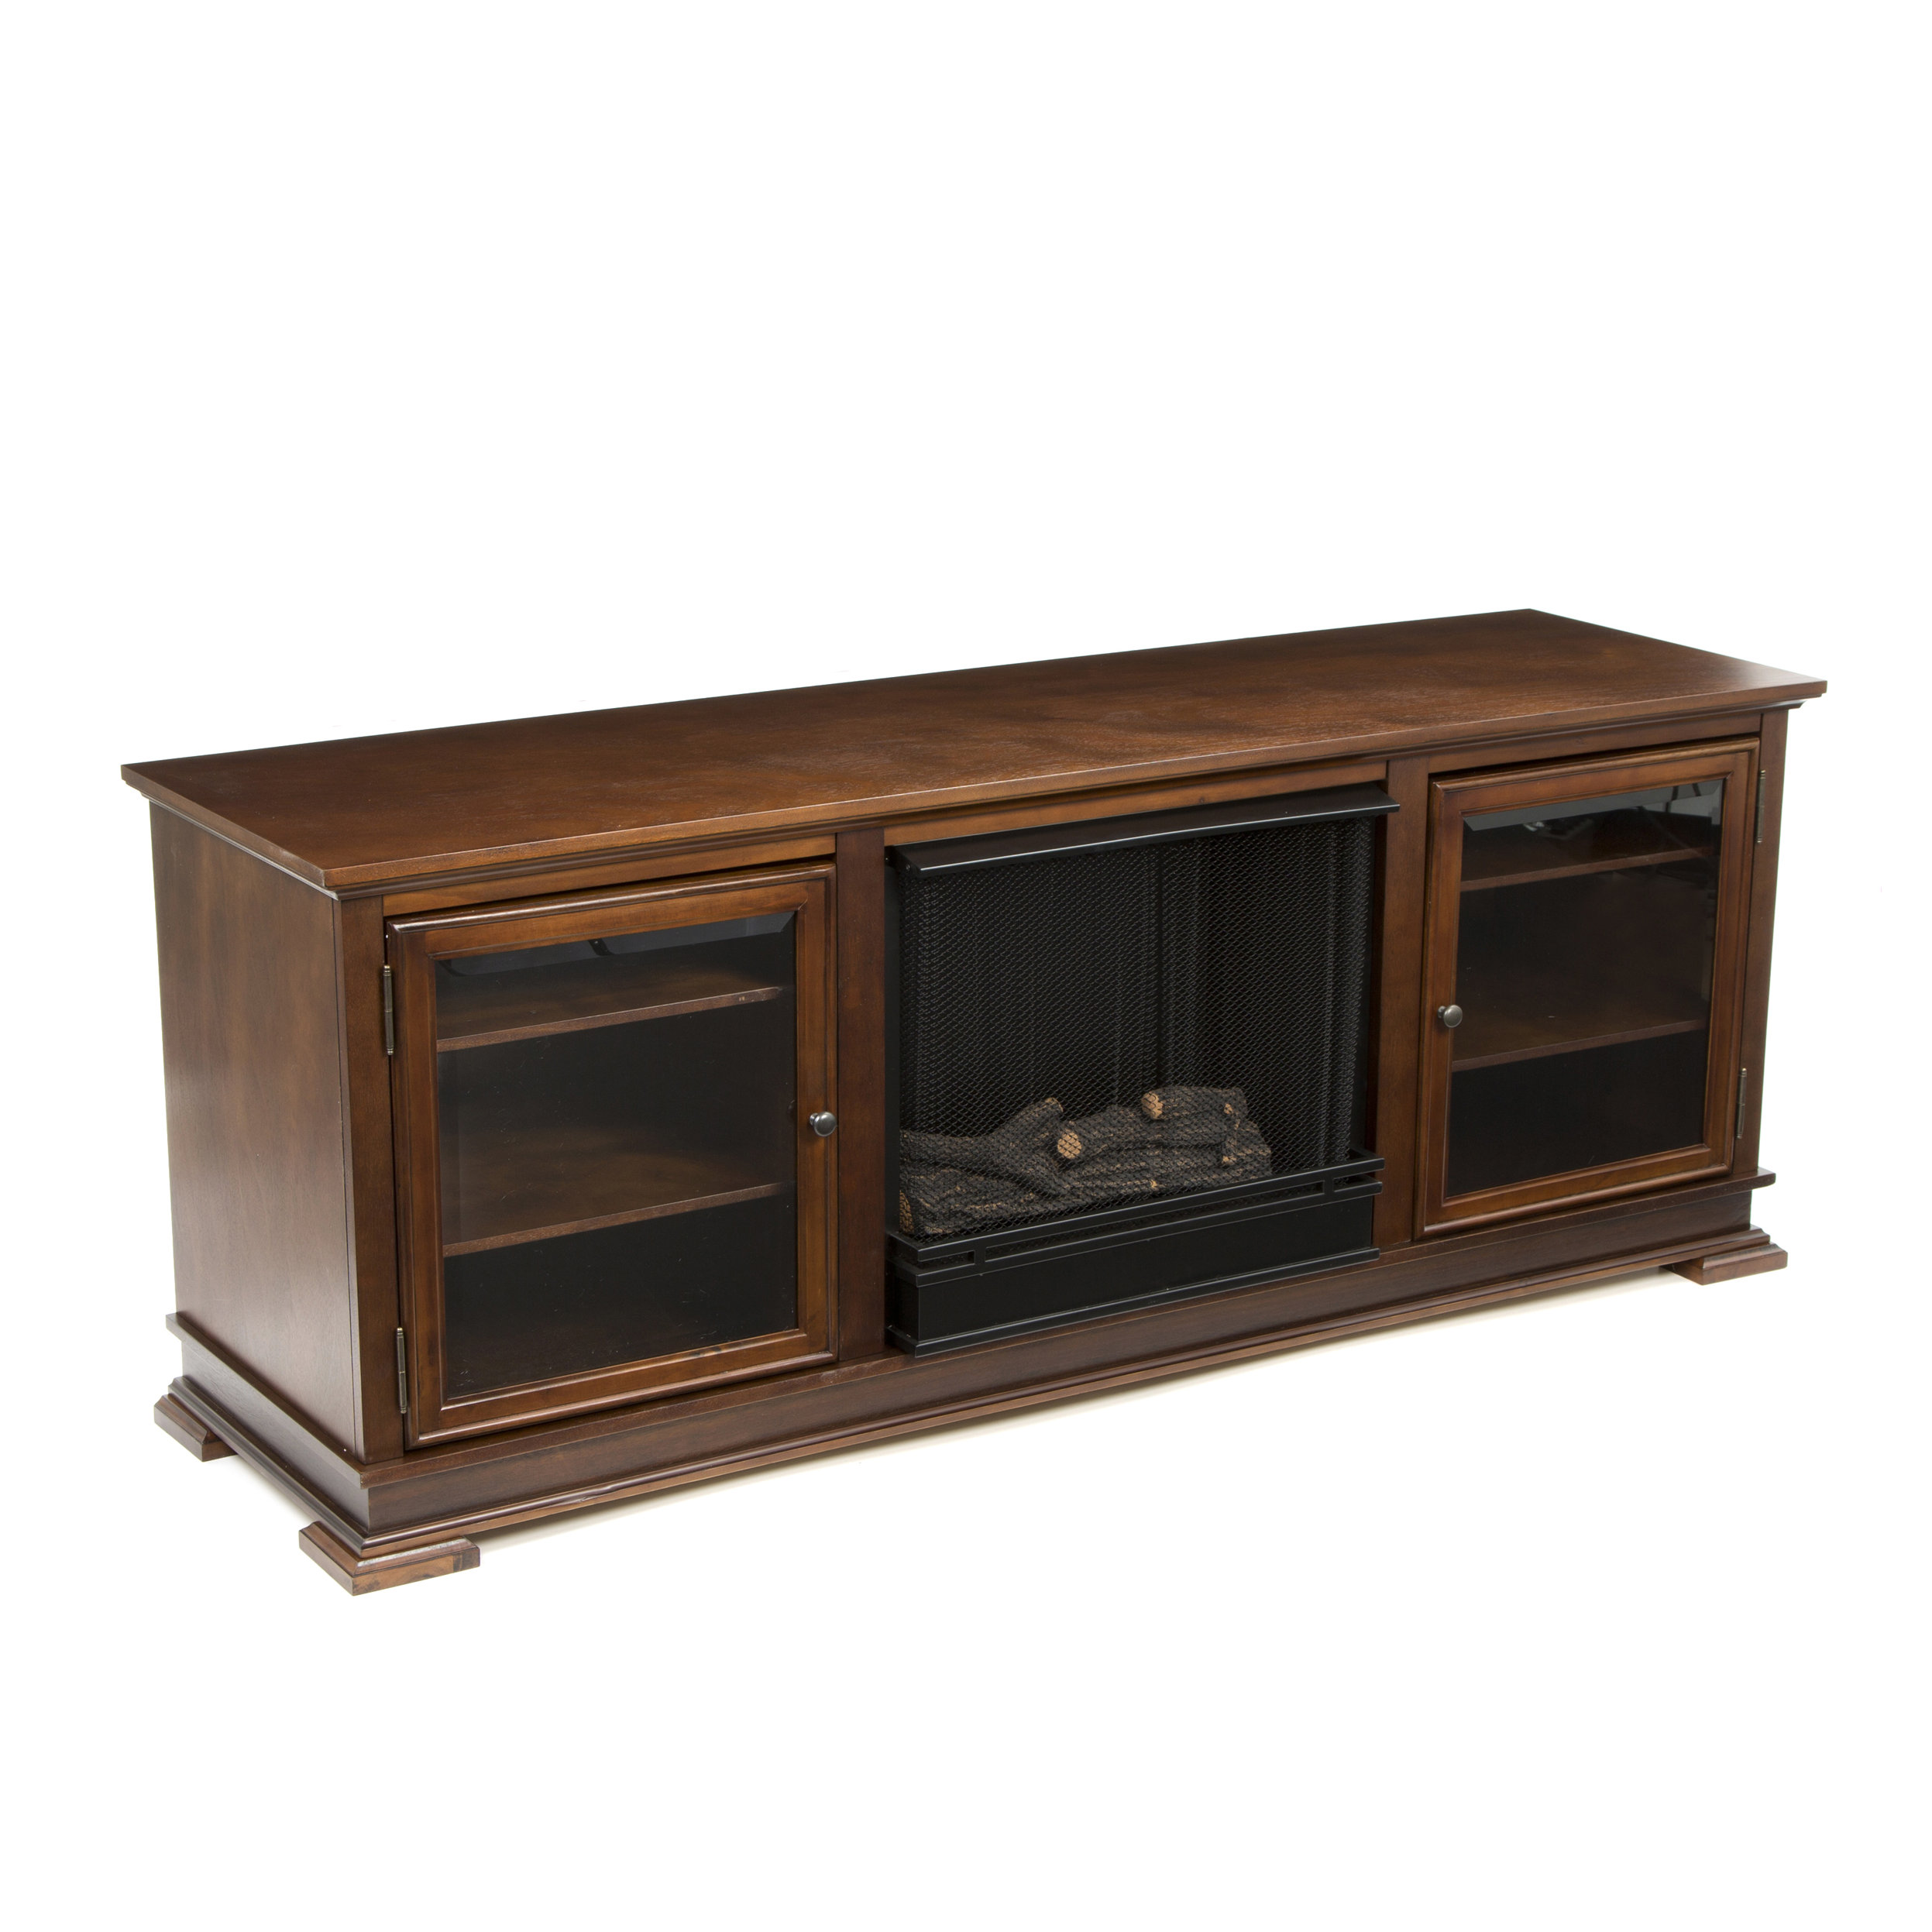 Real Flame Hudson Ventless TV Stand with Electric ...